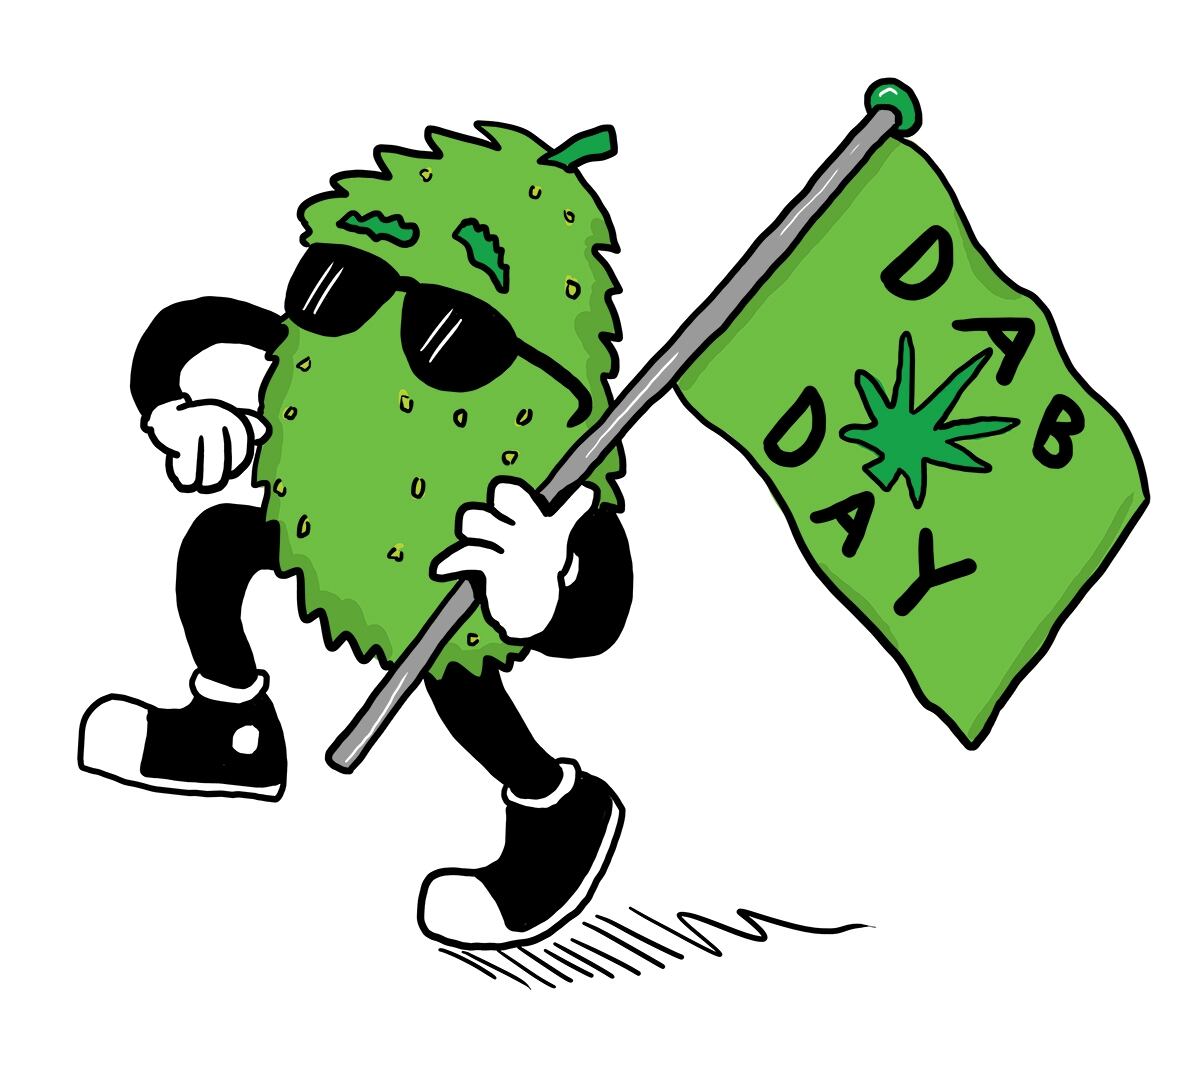 Tips on How to Celebrate Dab Day, the Other Great Stoner Holiday